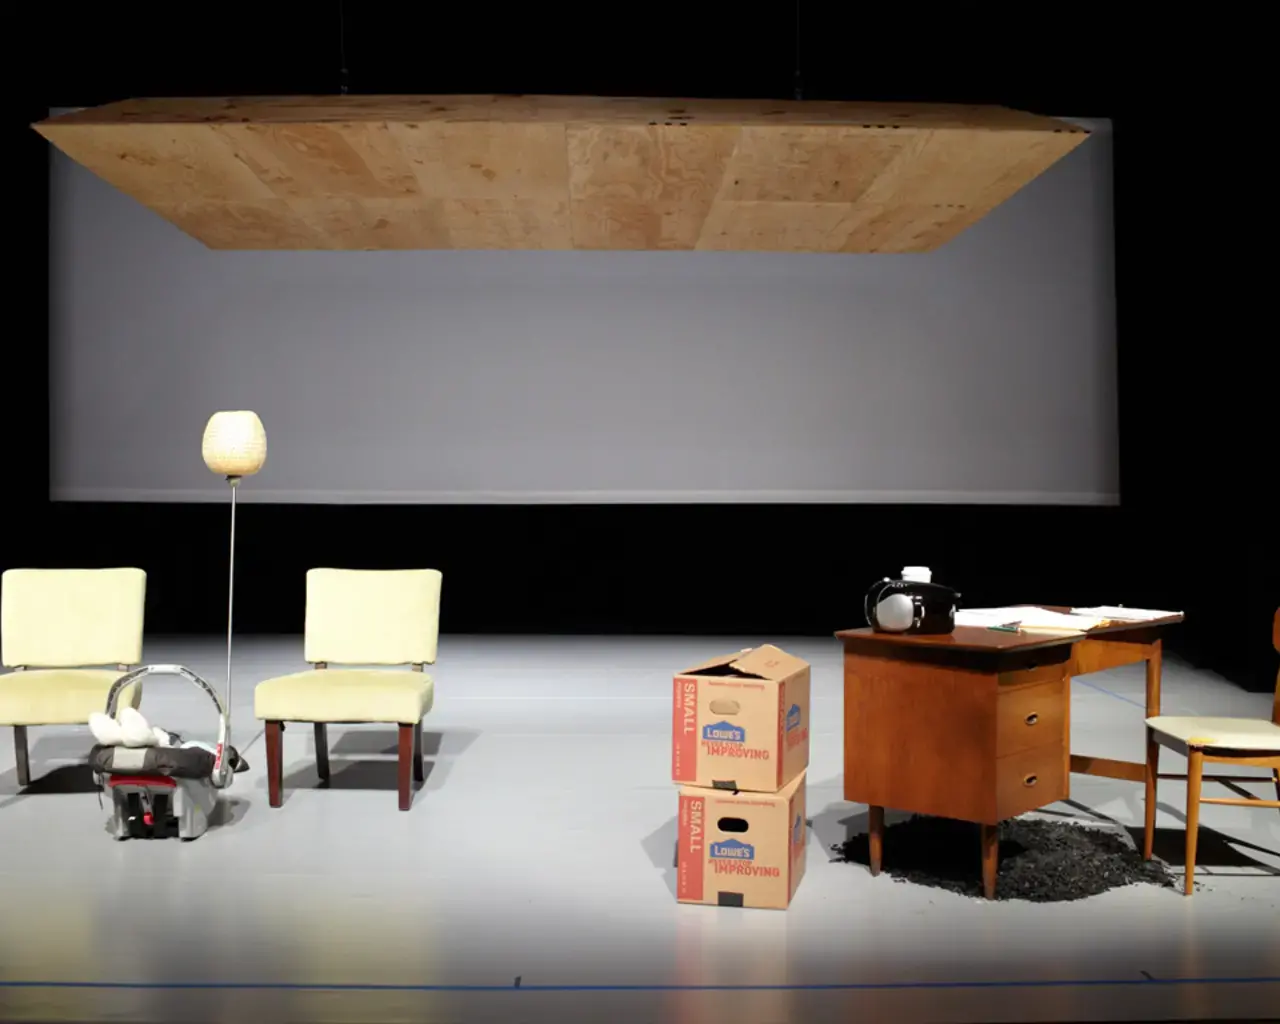 Pig Iron Theatre Company, set for "Zero Cost House," set designed by Mimi Lien. Photo courtesy of Pig Iron Theatre Company.